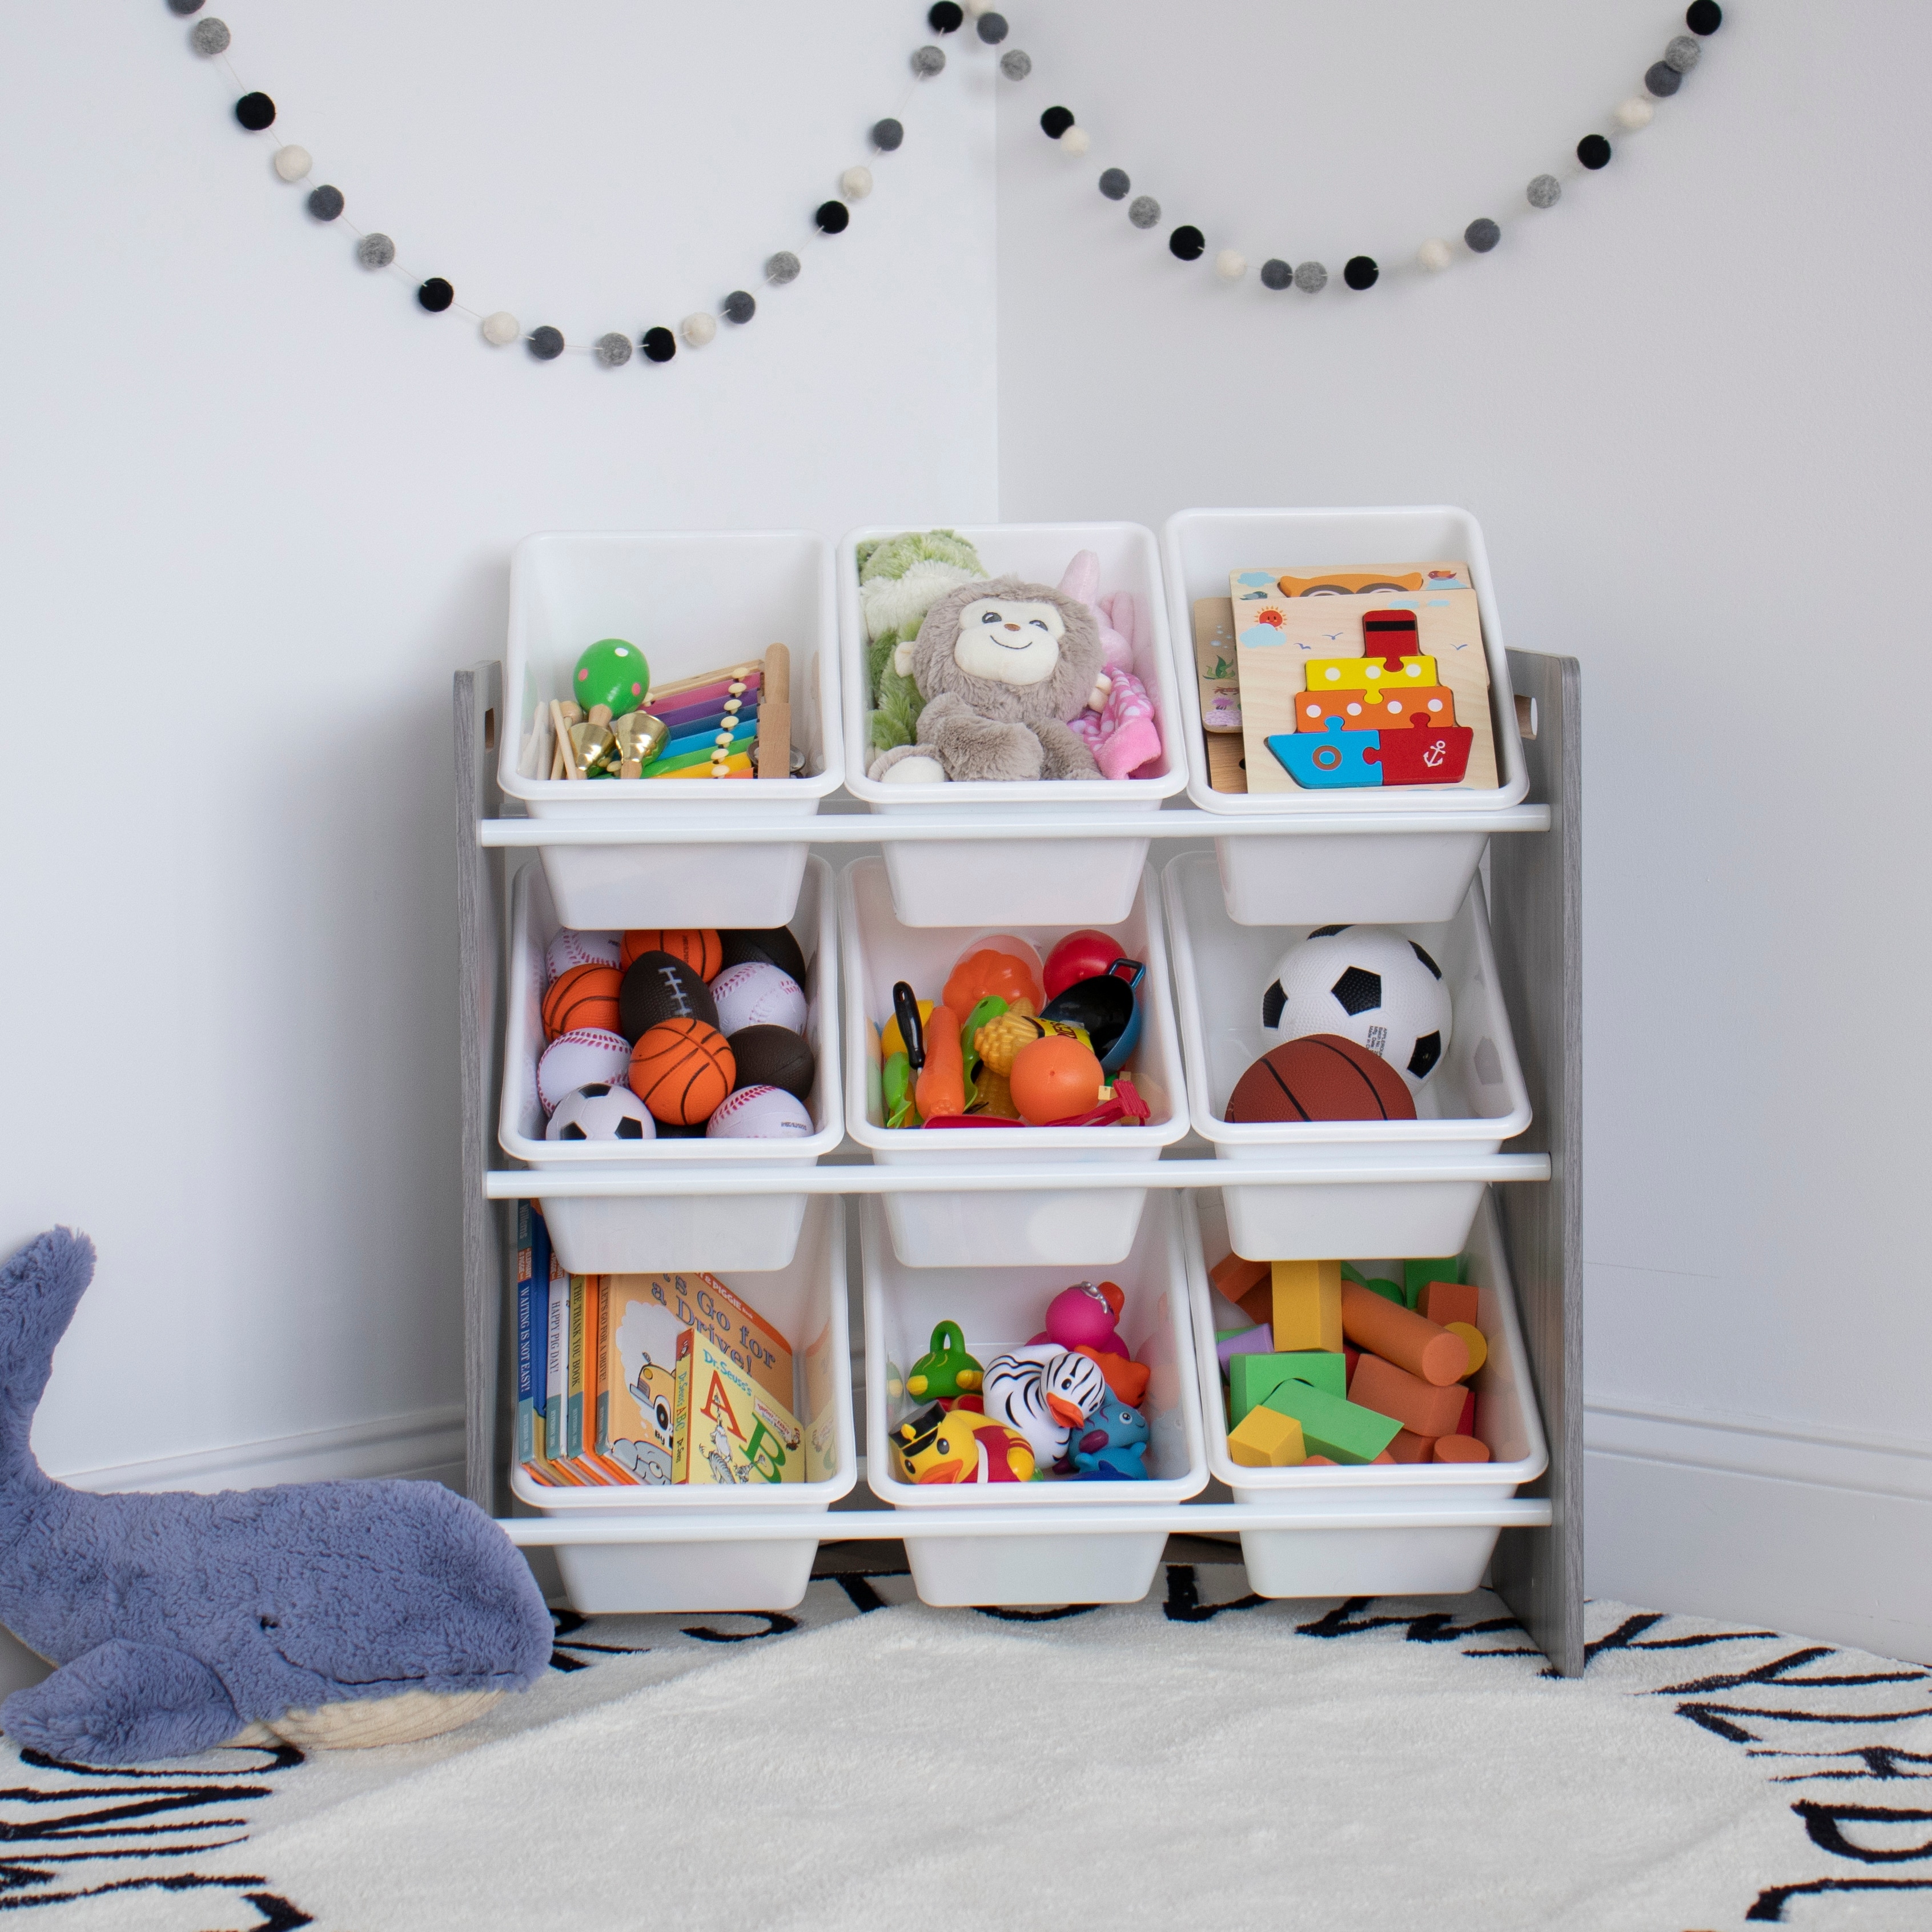 https://ak1.ostkcdn.com/images/products/is/images/direct/190c9ff70e486ee33e765cca7ef7f8d4f3438981/Humble-Crew-Slate-Toy-Storage-Organizer-with-9-Storage-Bins%2C-Grey-Wood-Grain-White.jpg